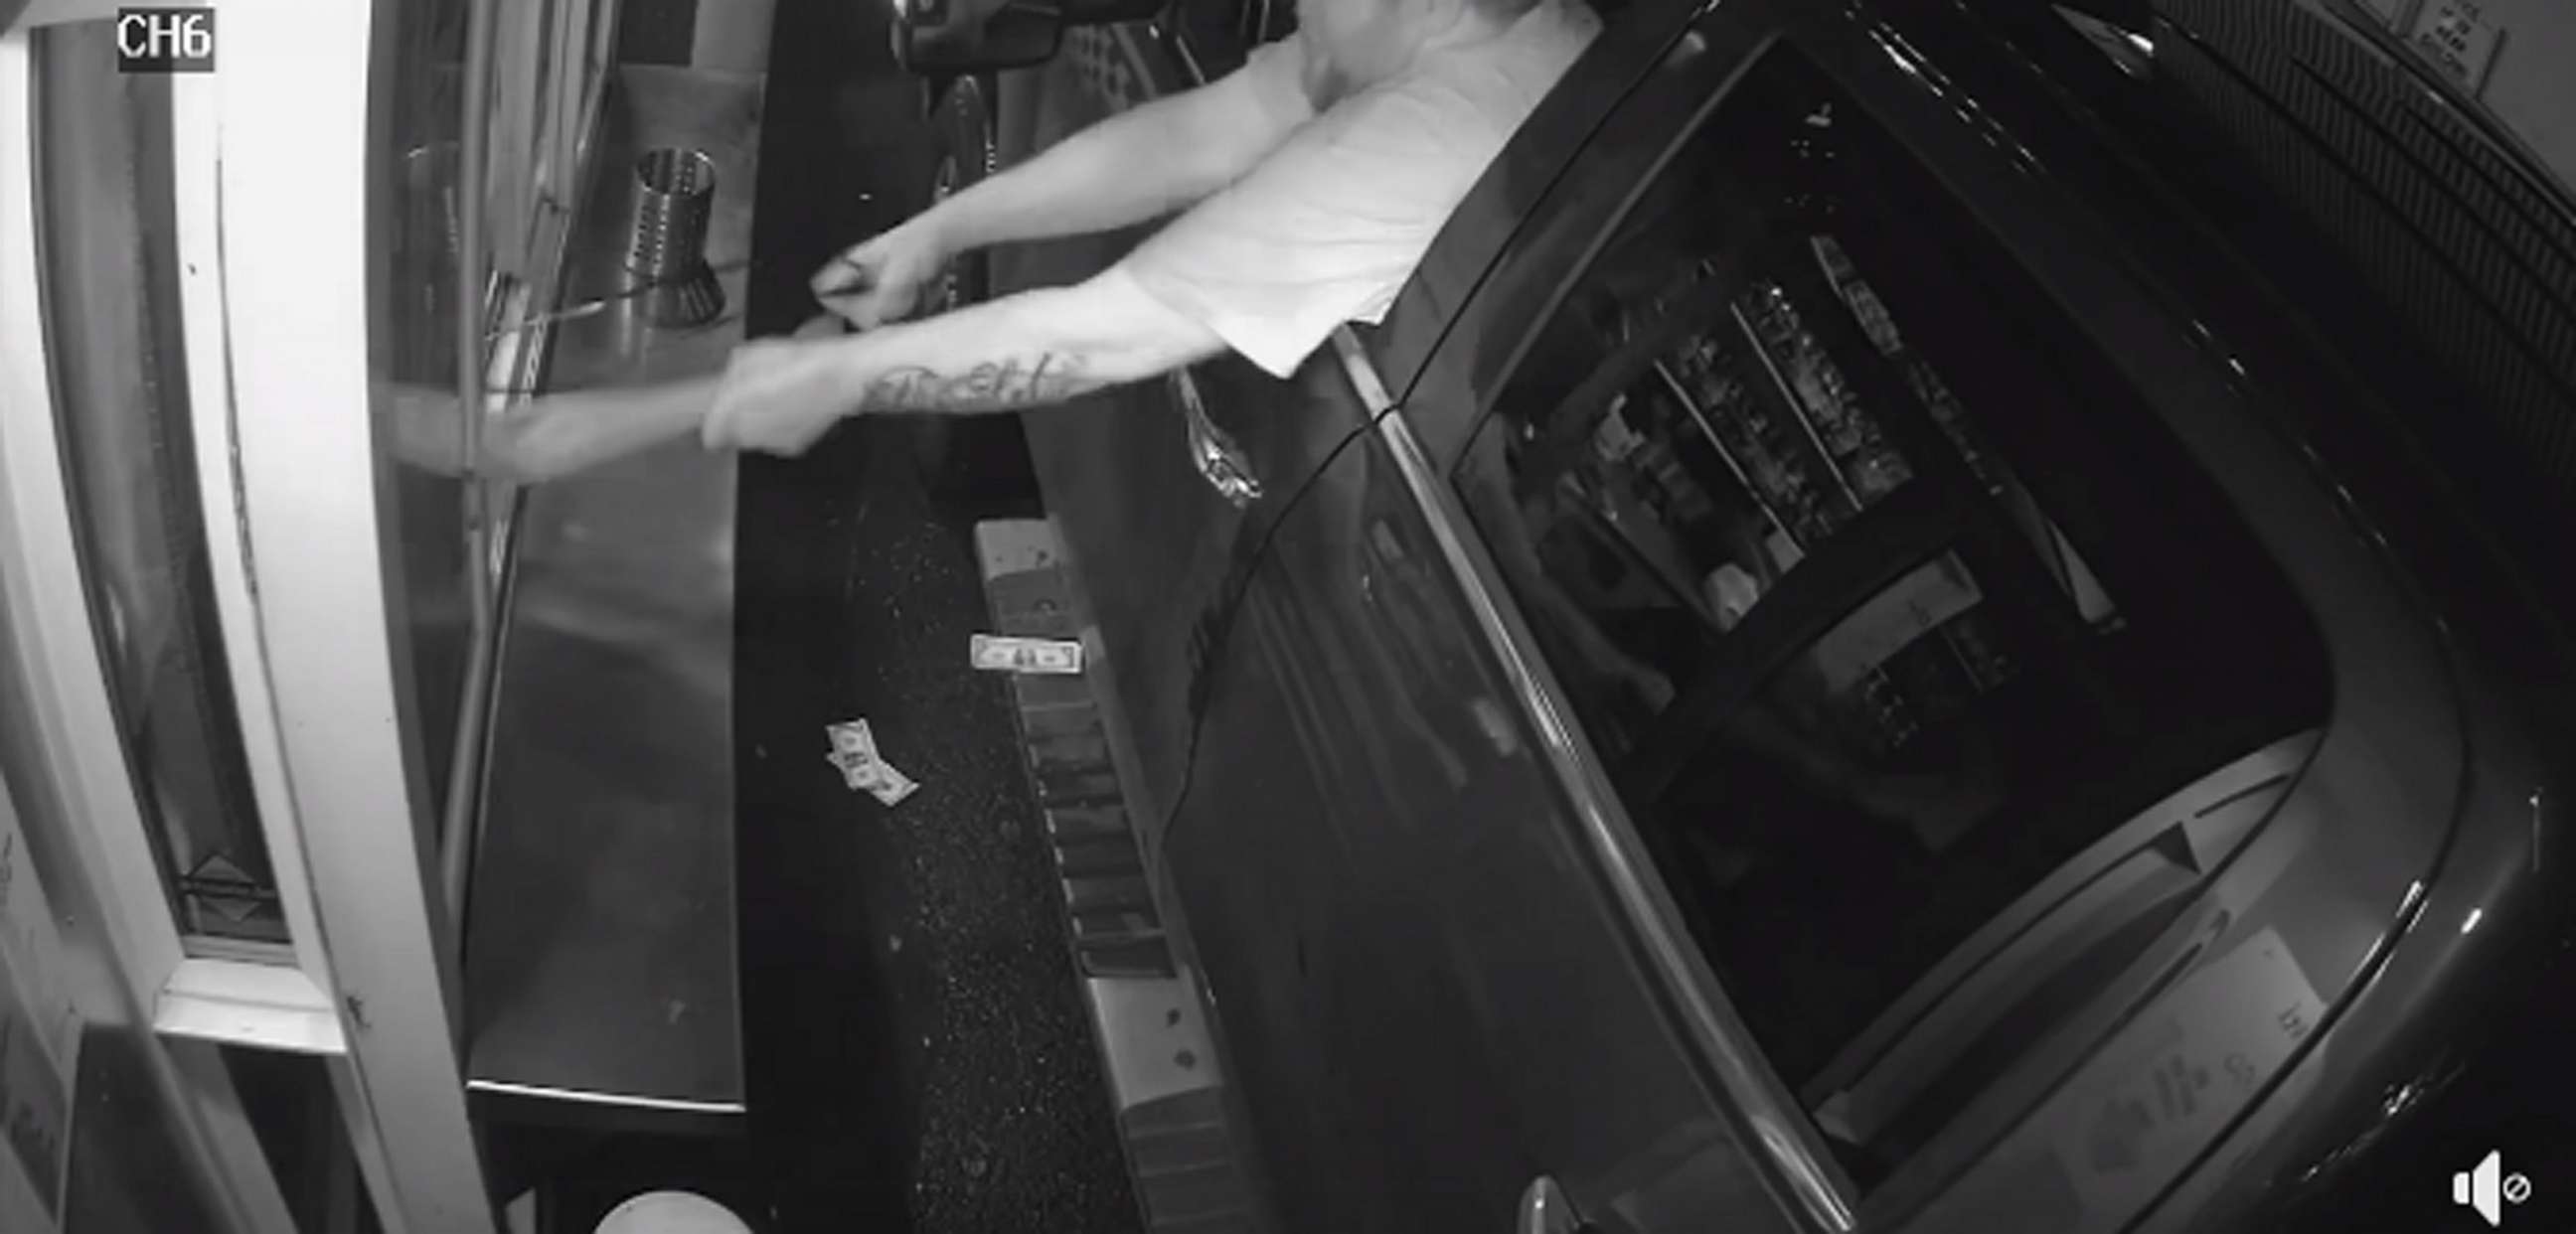 PHOTO: Police in Auburn, Washington, released surveillance footage while trying to identify a suspect who allegedly tried to abduct a barista on Jan. 16, 2023.